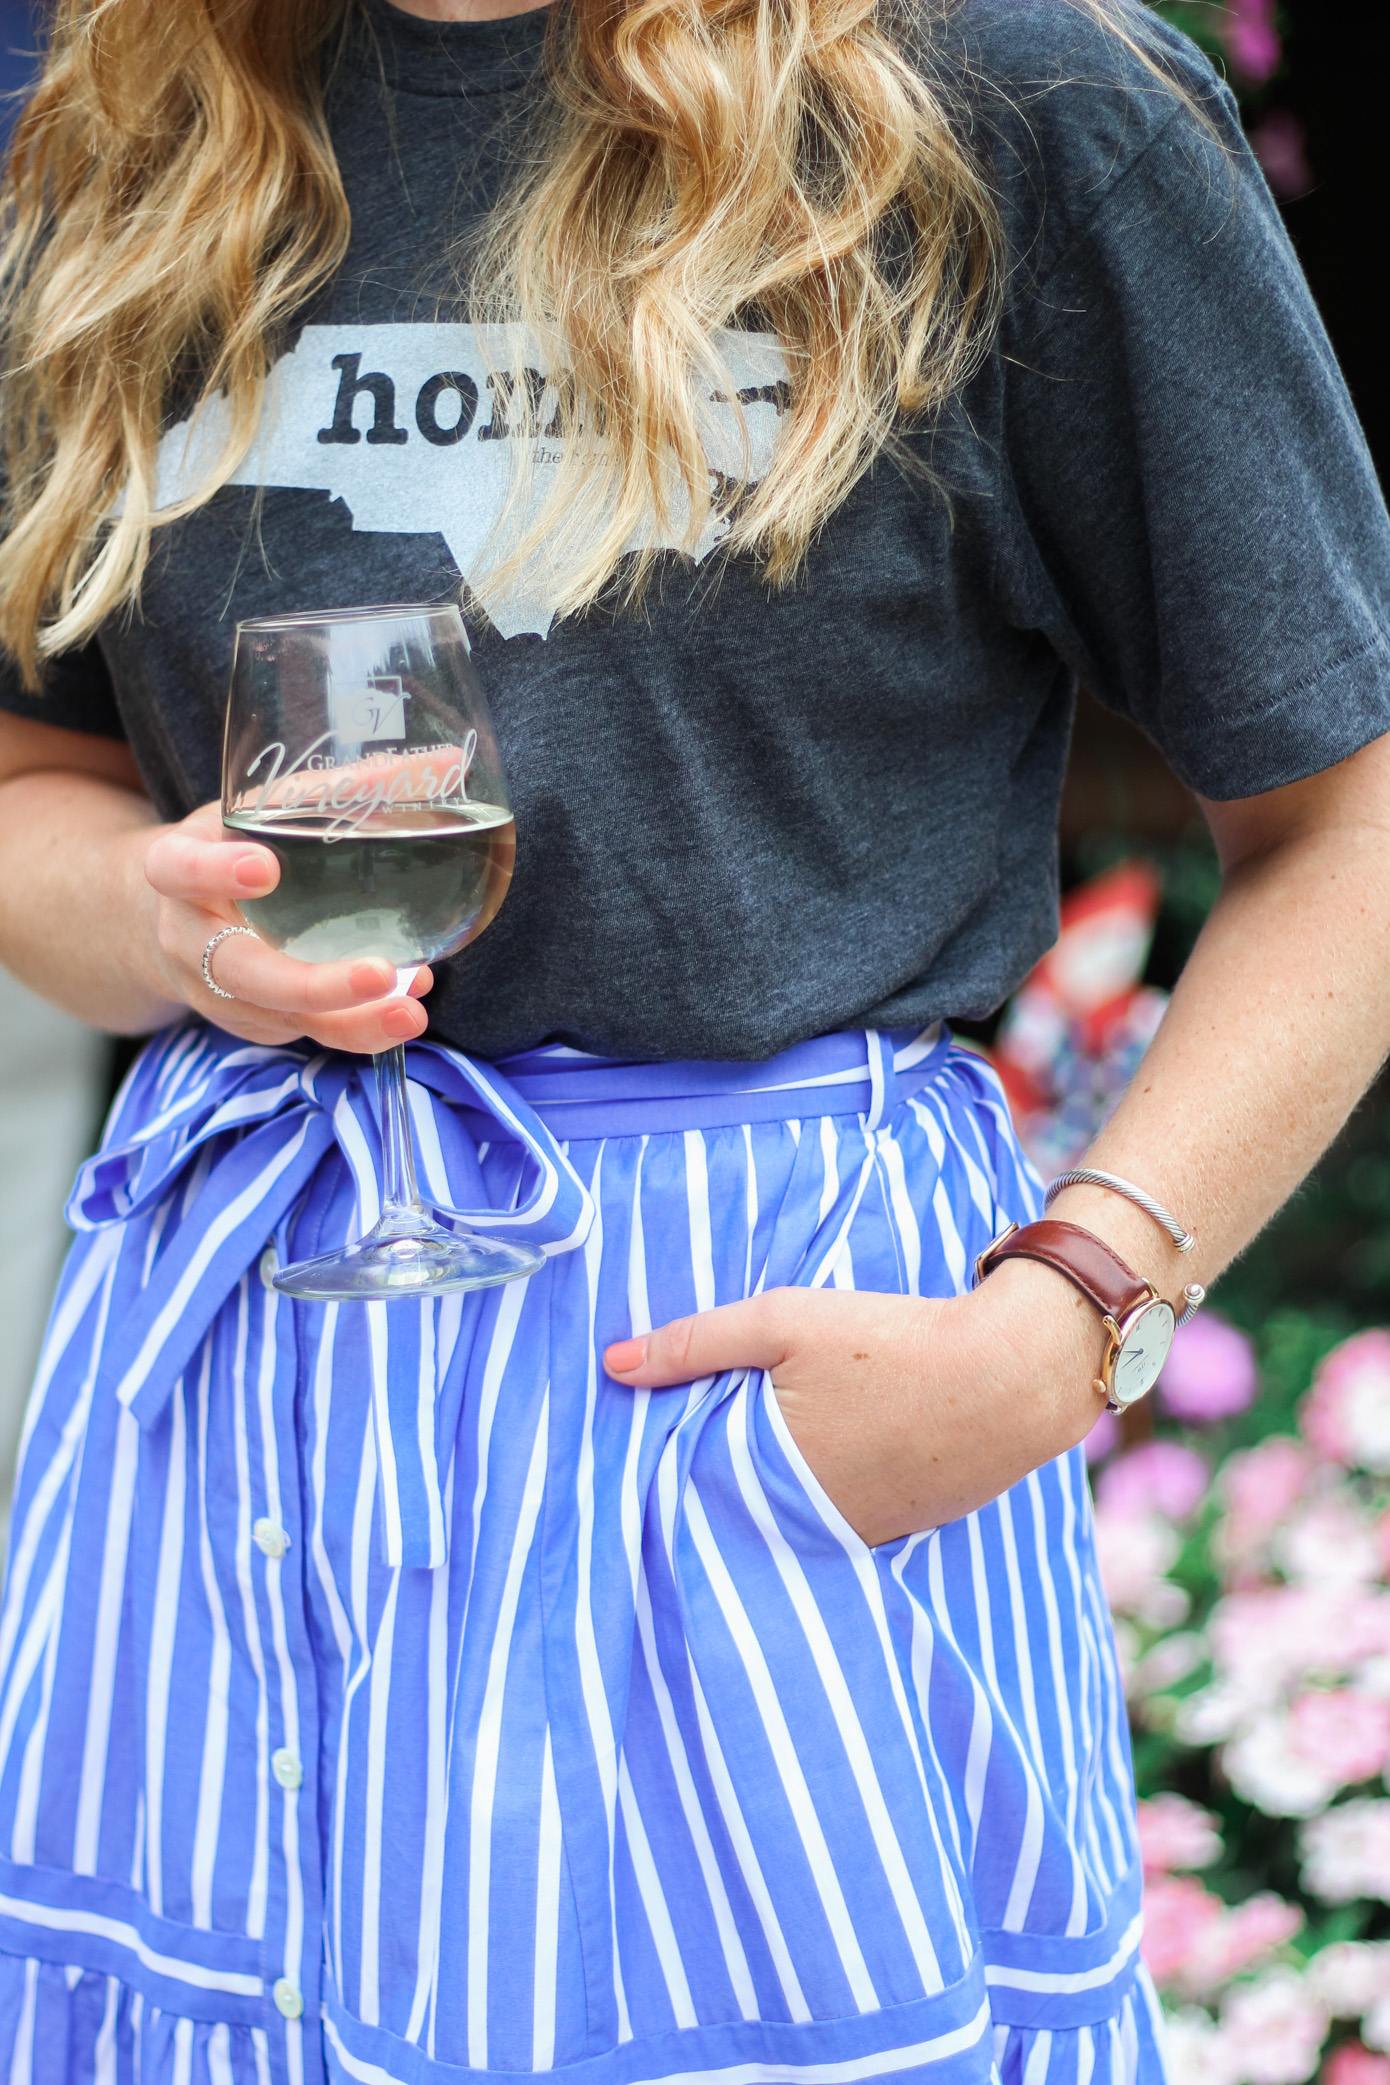 Home Tee Shirt | The Home T | What to Wear to a Winery | Louella Reese Life & Style Blog 